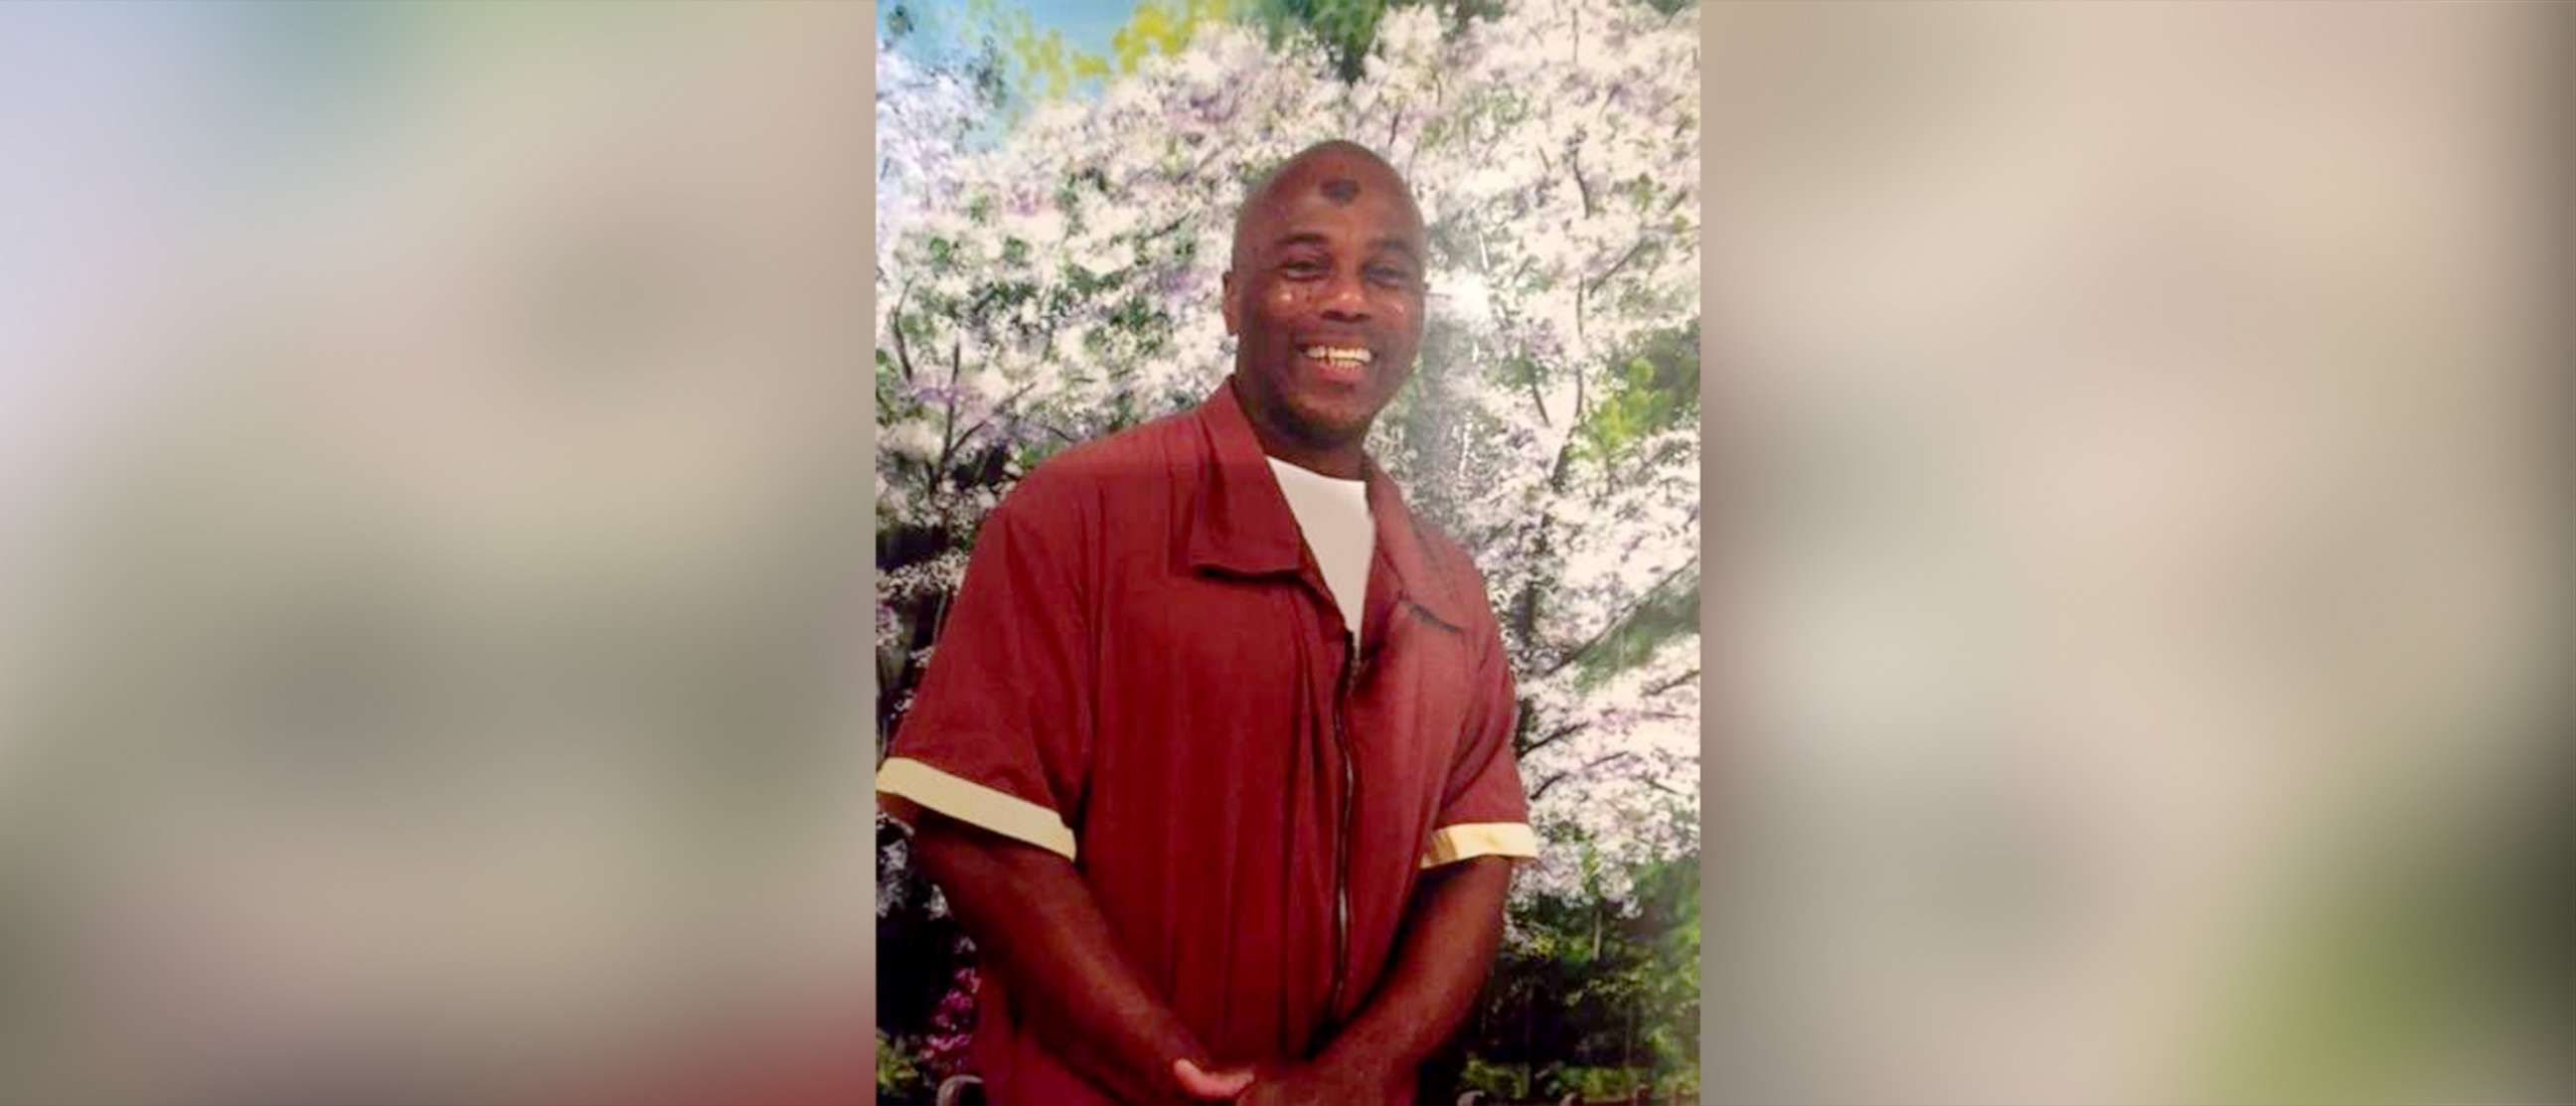 PHOTO: Christopher Williams, who was exonerated after being on Death Row for 25 years, is seen in an undated handout photo.